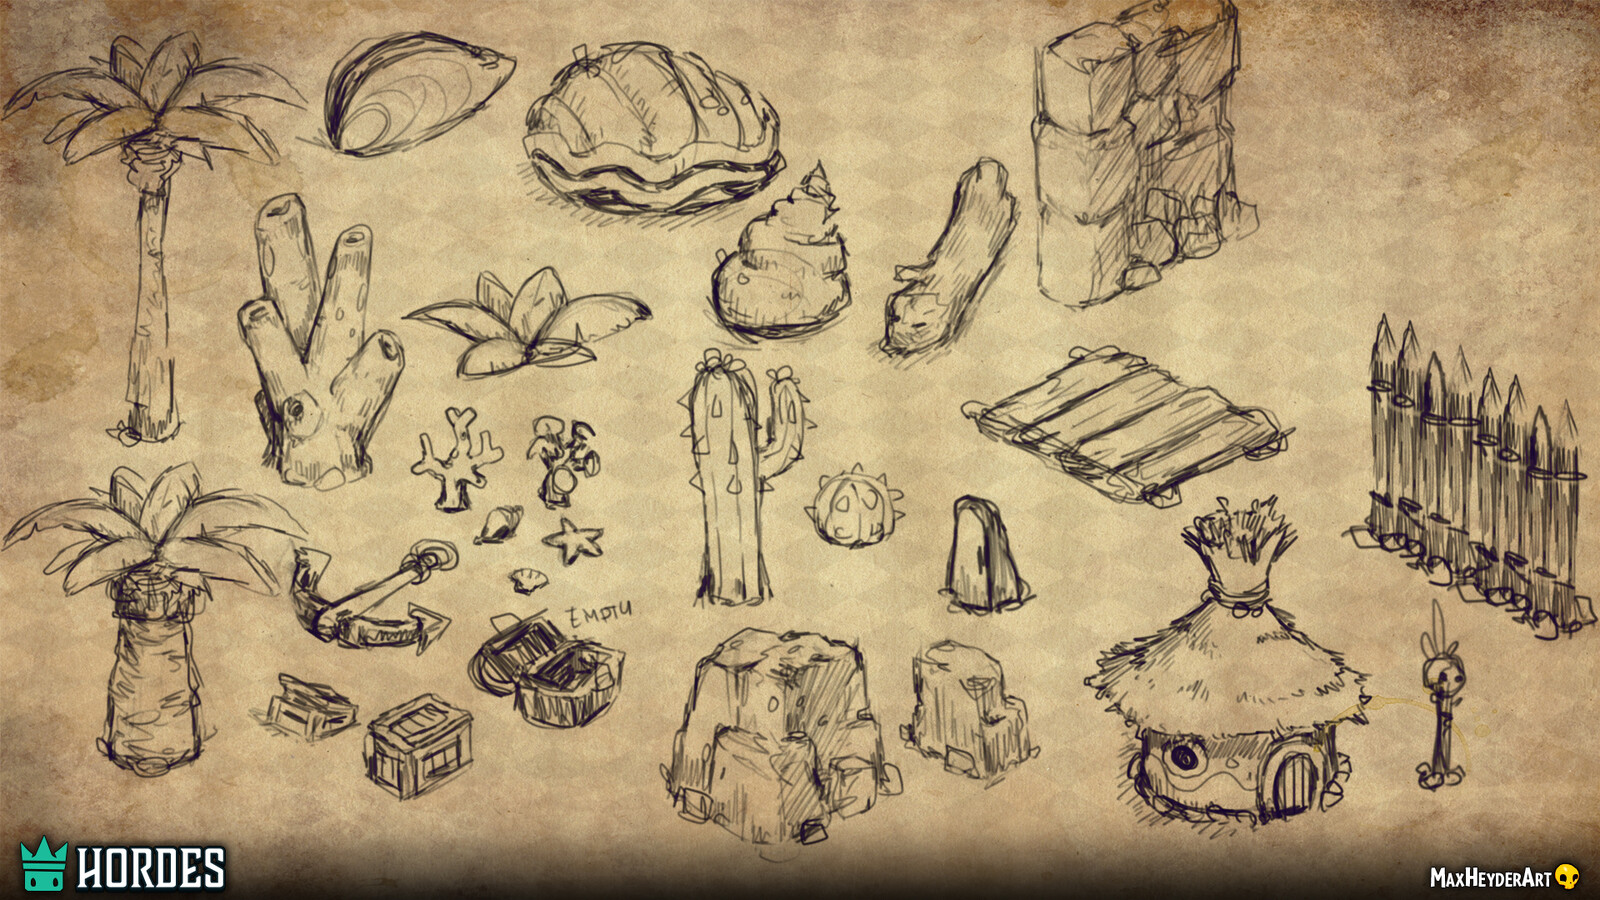 Not all assets that I concepted, we ended up using. In this case, we figured out that the assets were too specific for just one biome. We ended up reducing the number of assets tremendously, to ensure top performance, even on low-end devices.